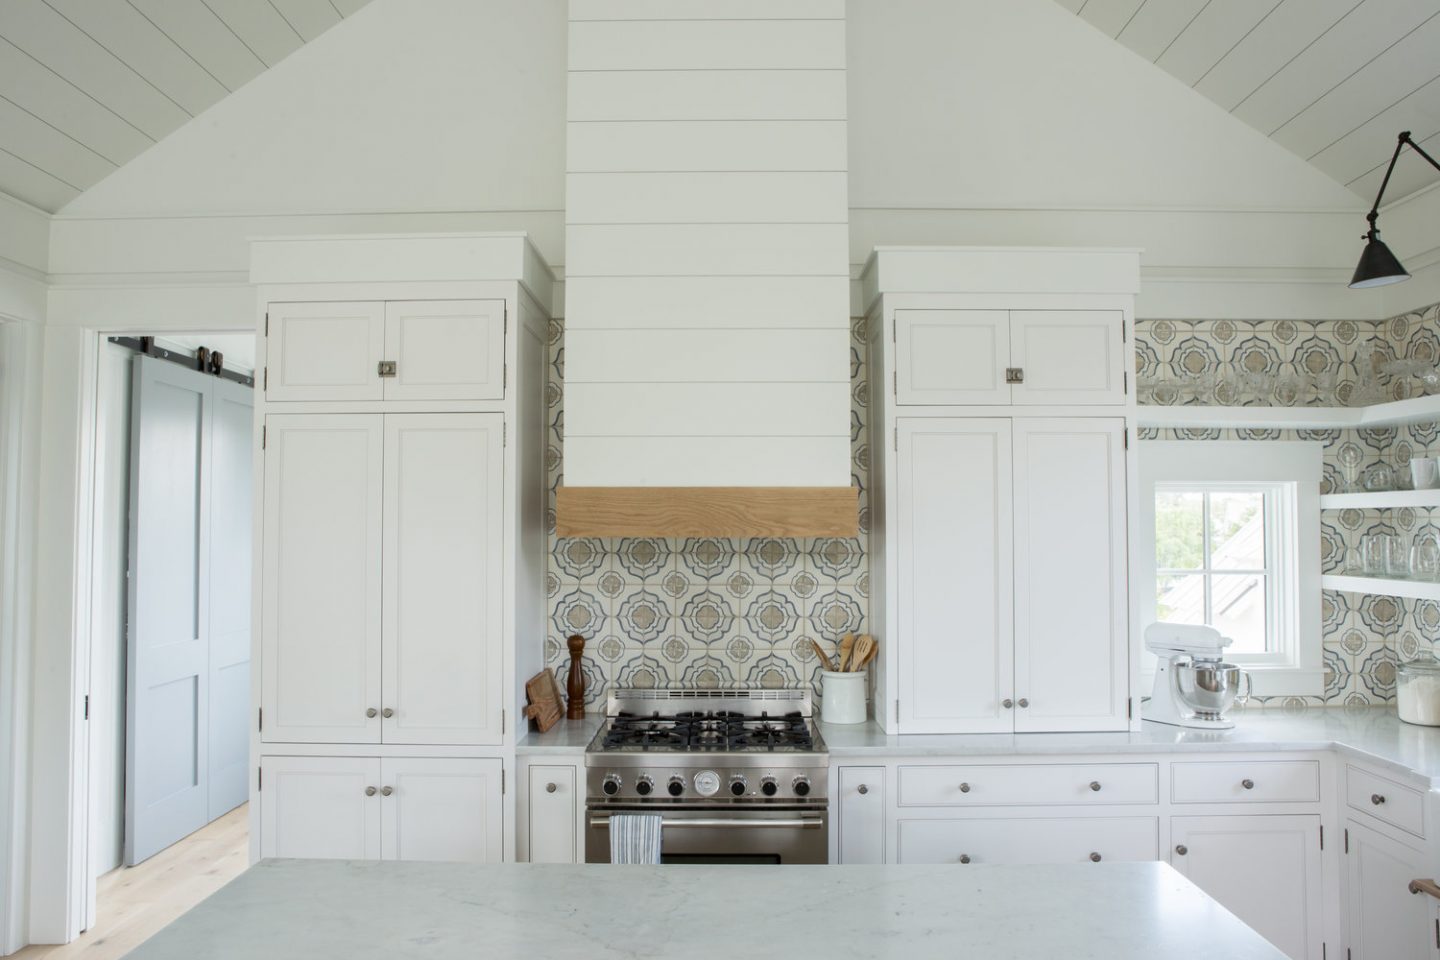 Classic white coastal cottage kitchen in Palmetto Bluff by Lisa Furey. Modern farmhouse design elements include floating shelves, shiplap, white oak flooring, and apron front farm sink.